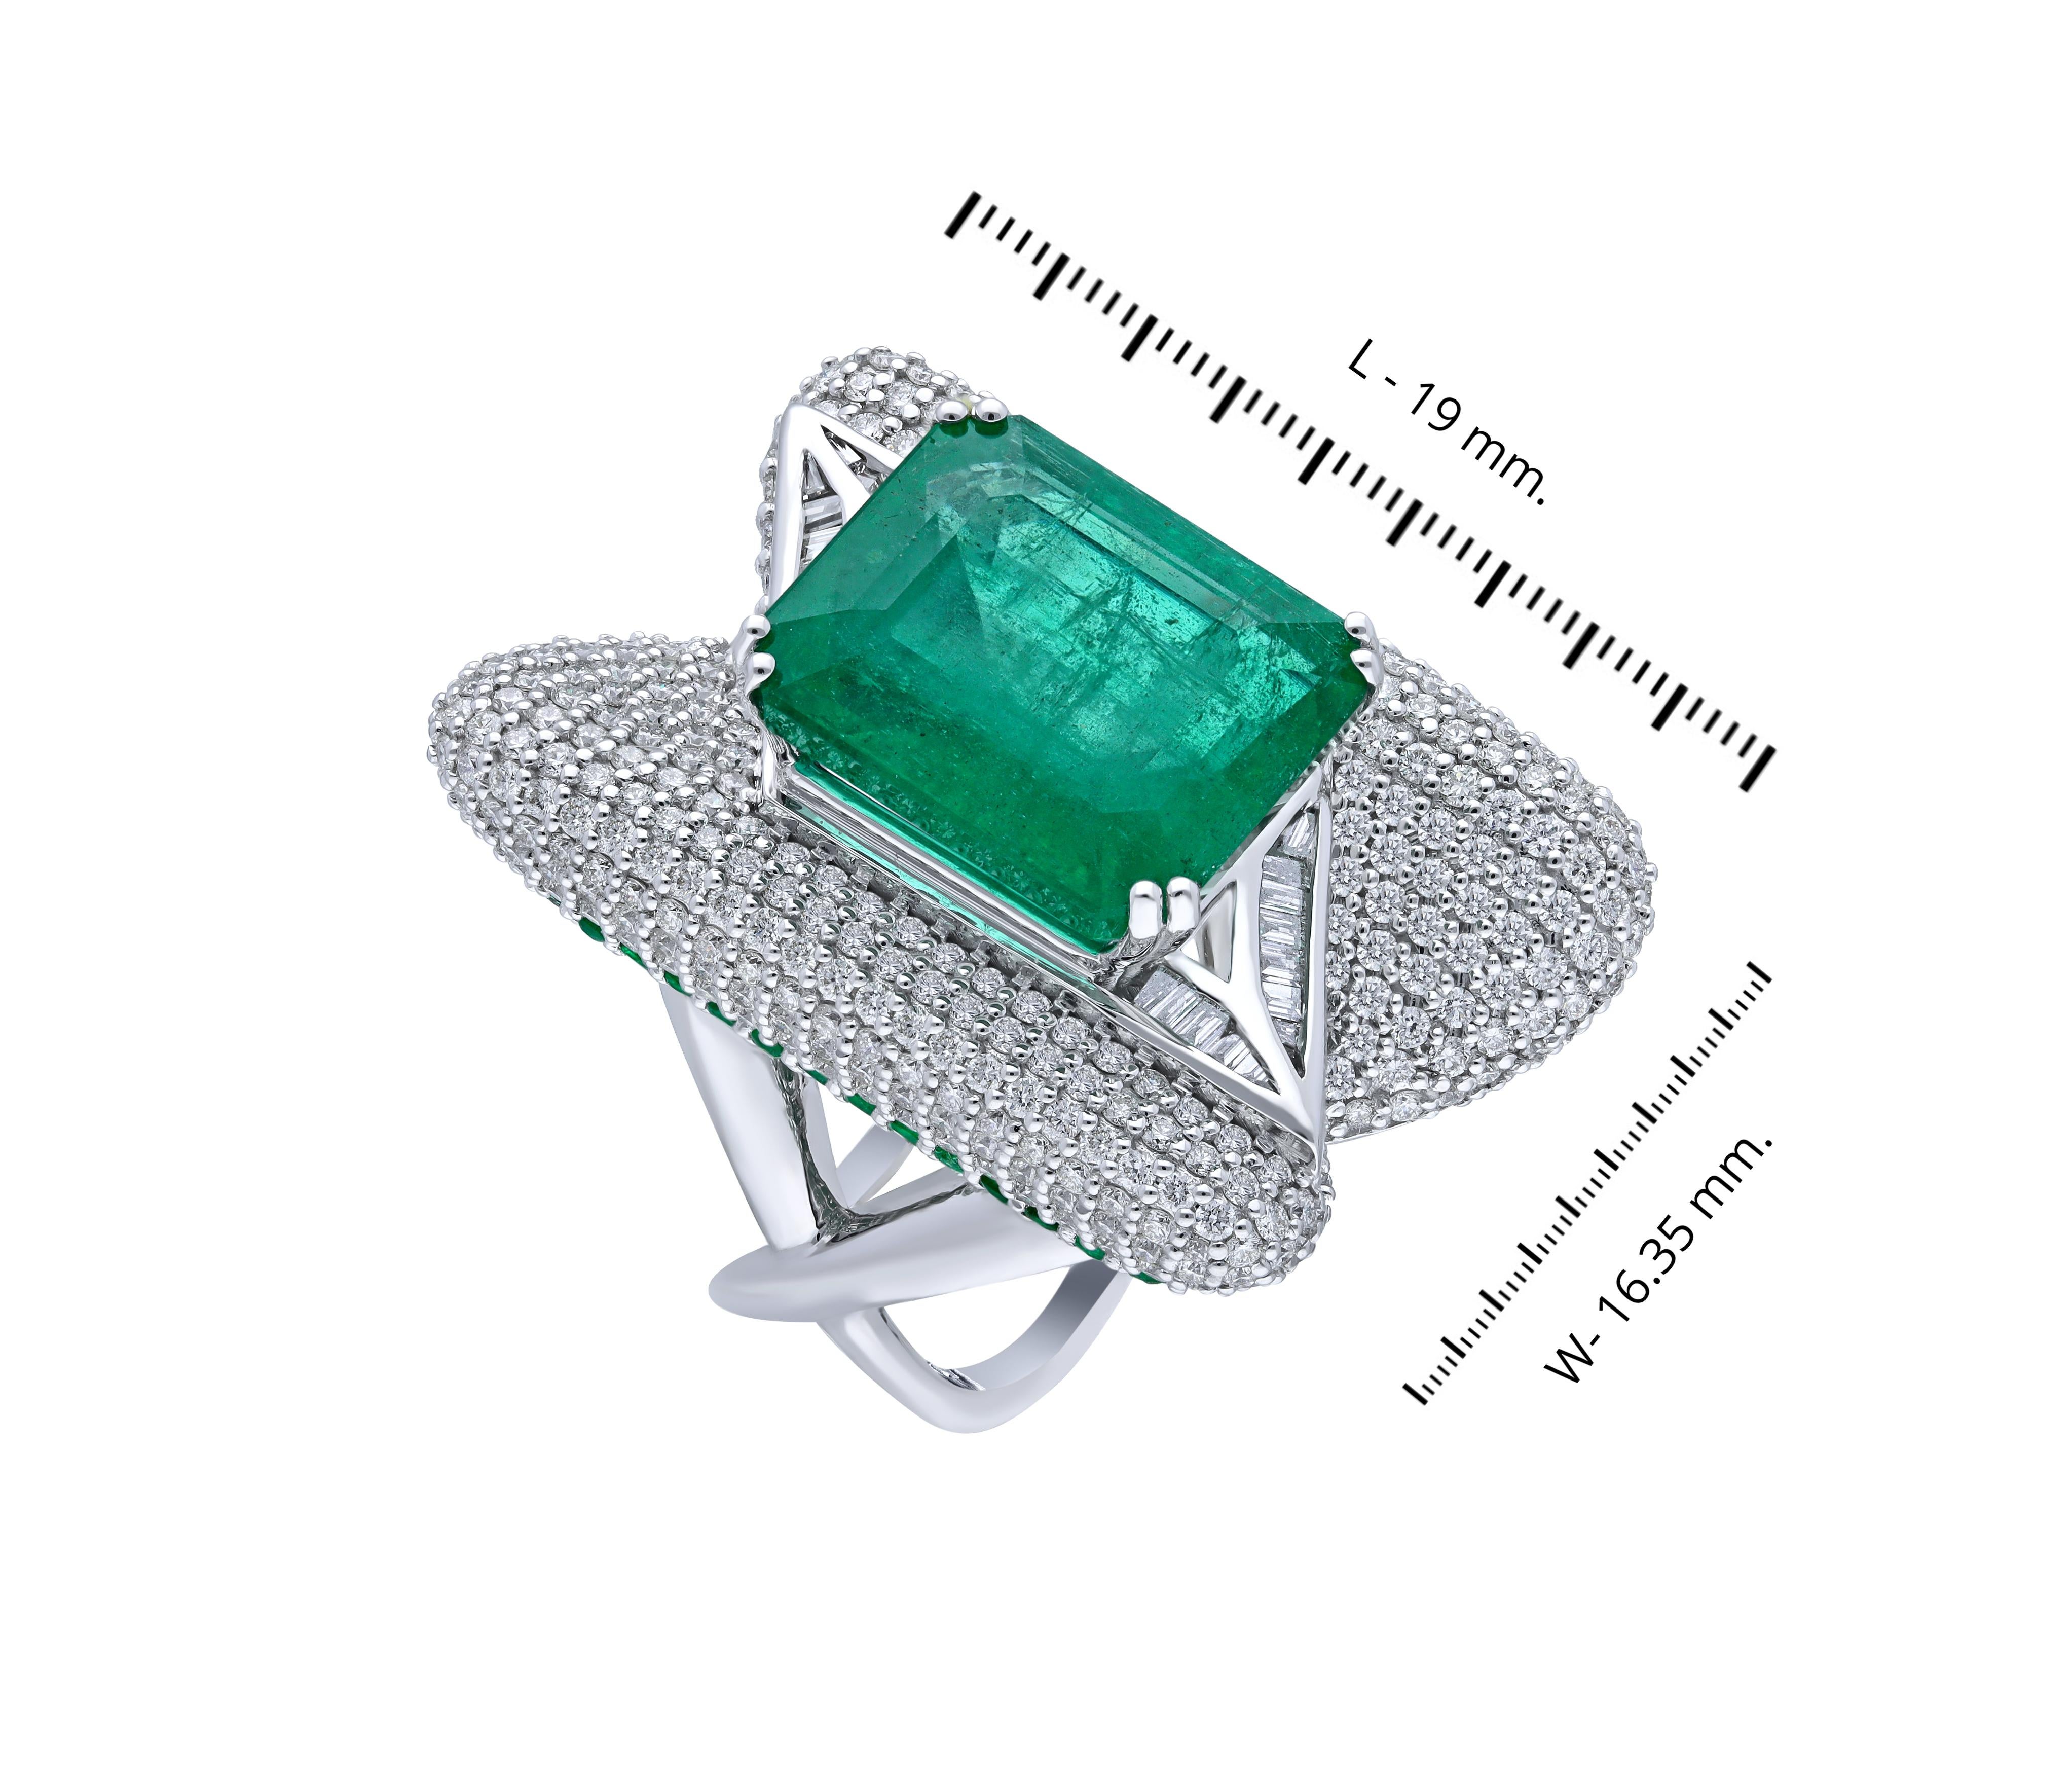  A collectors Multidimensional cocktail ring with a Zambian emerald (10.48 cts) set in a valley of pave diamonds on either side with baguette diamonds below. On the outer sections tsavorite garnets (check the tsavorites or emerald) are paved down as